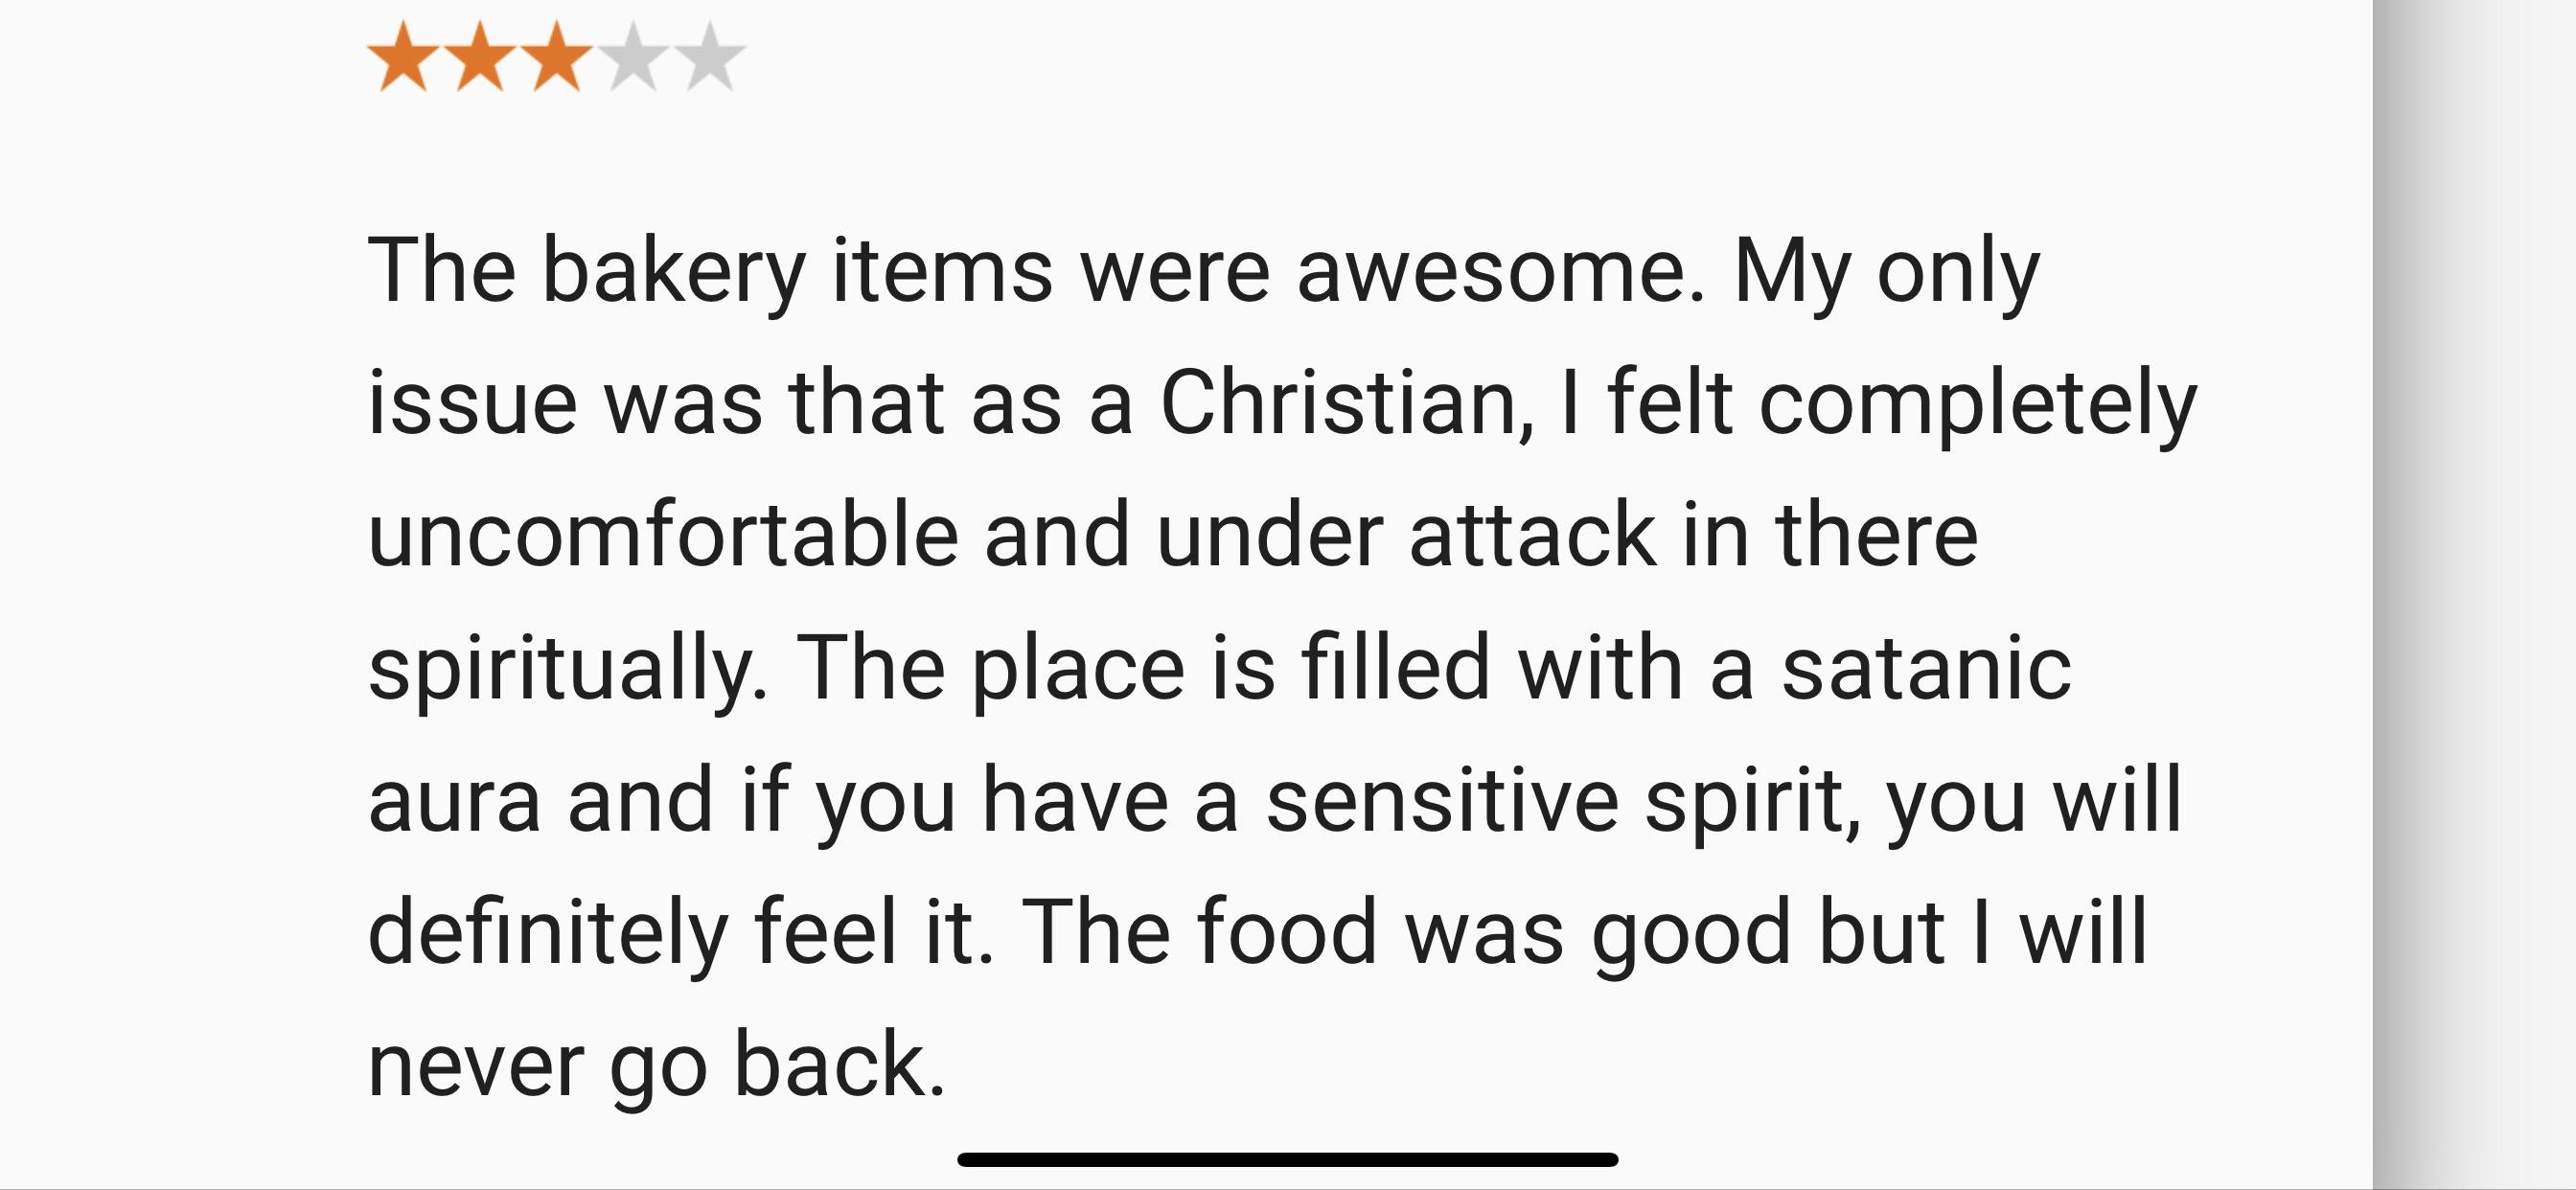 Owning a vegan bakery gives off Satanic vibes, apparently...